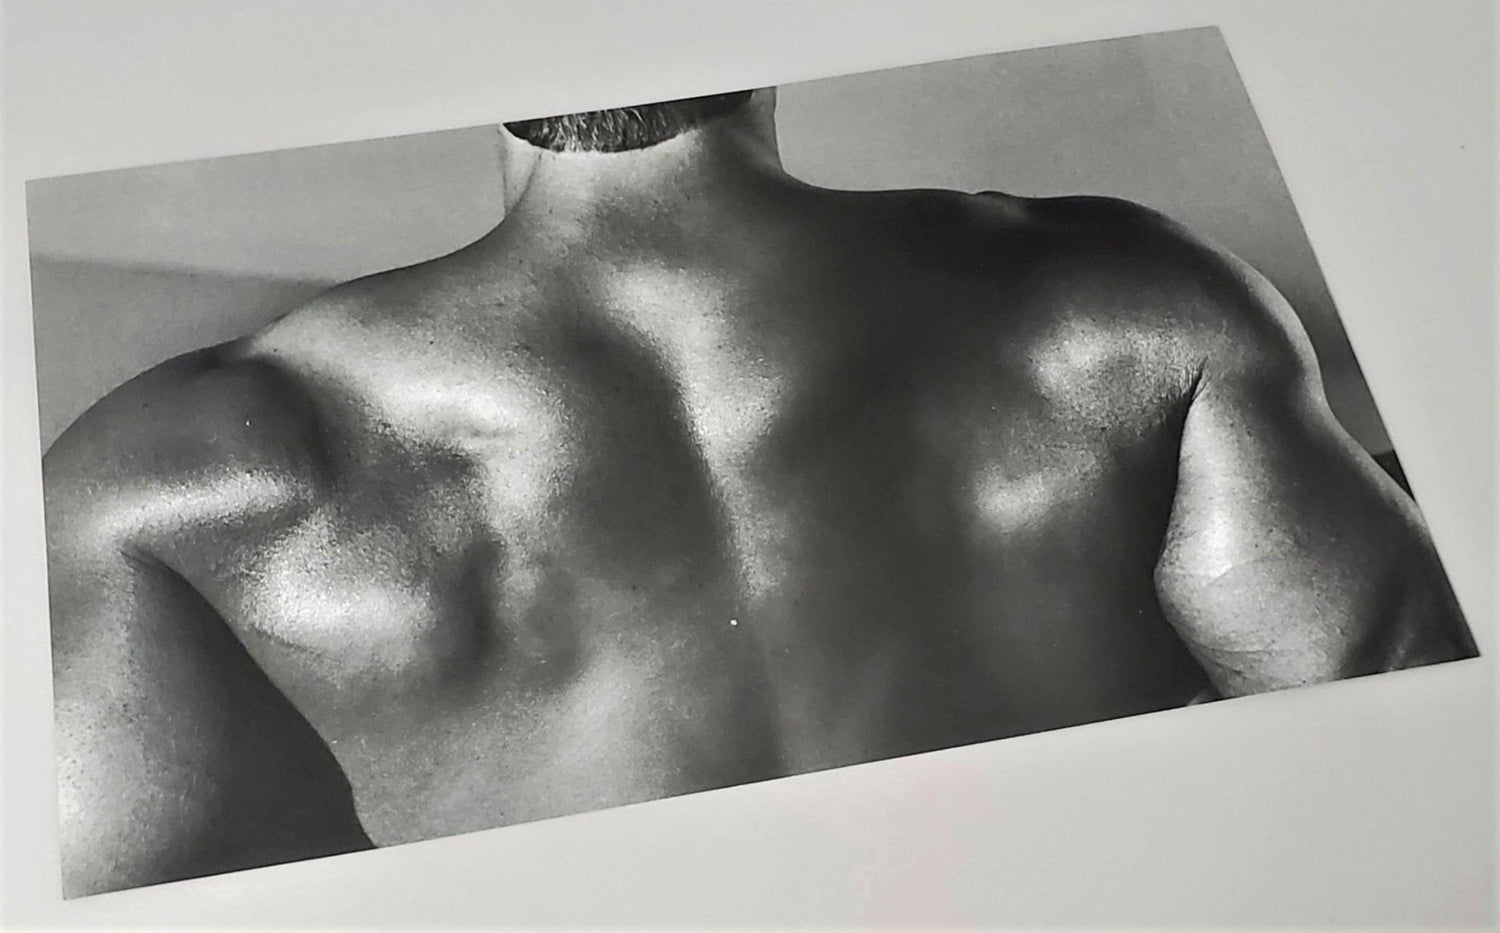 Original Herb Ritts photograph page featured in 1991 Duo hardcover book